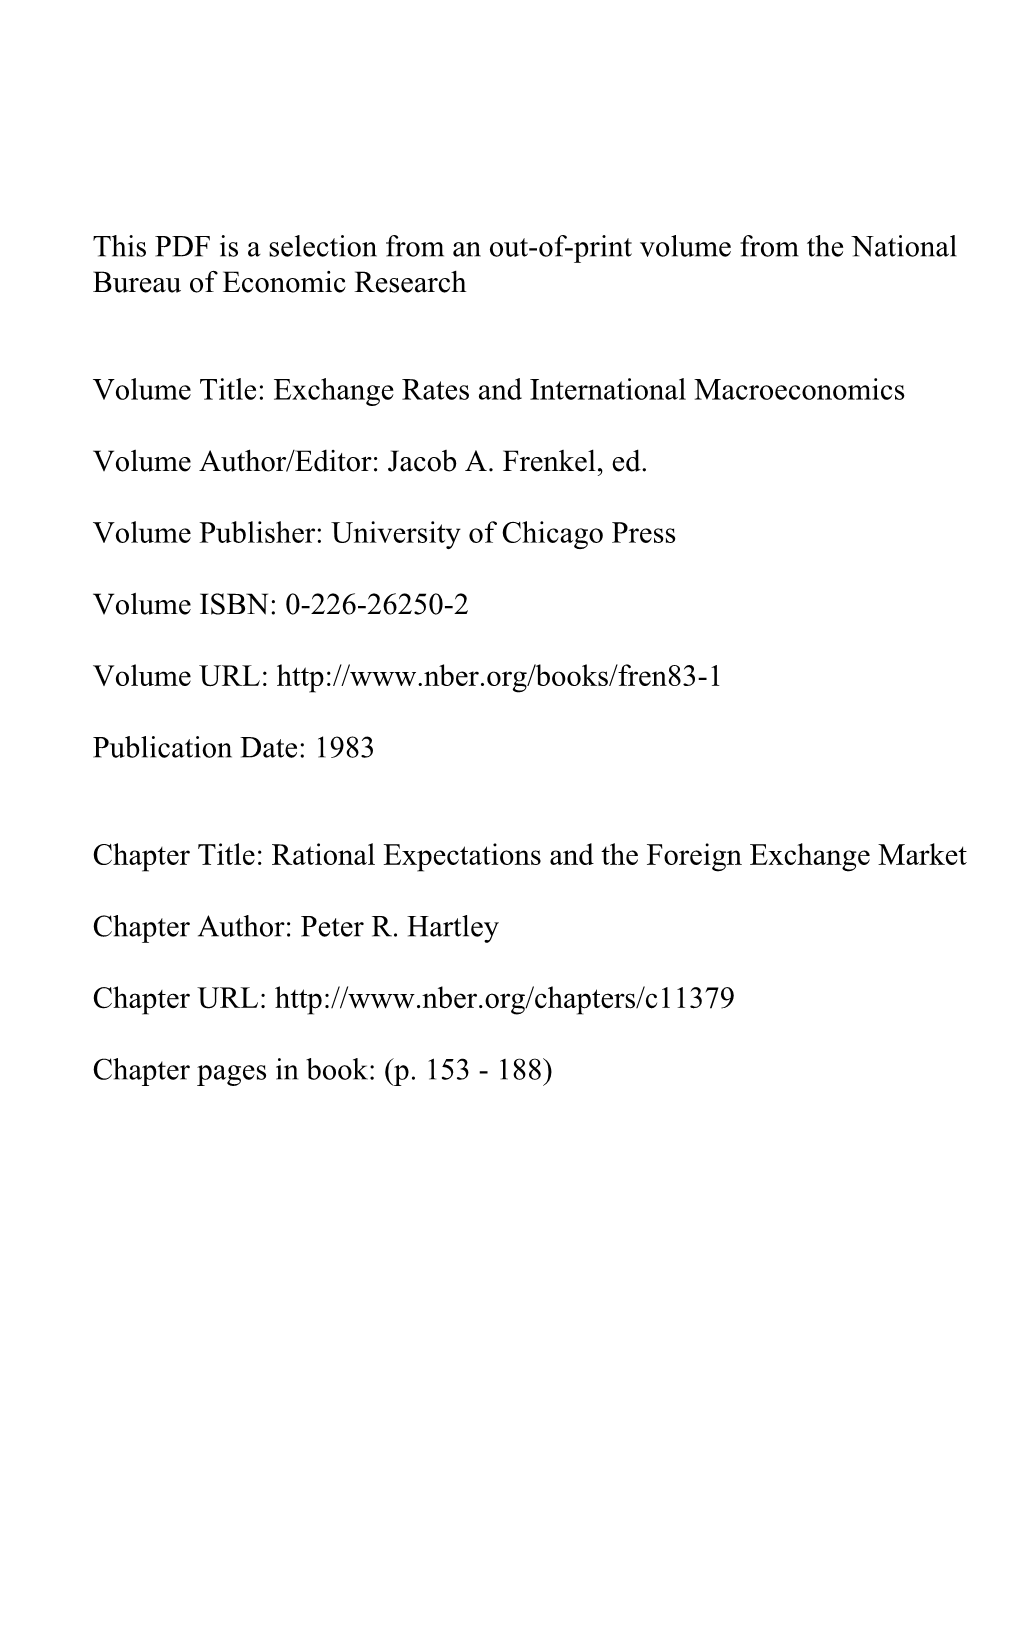 Rational Expectations and the Foreign Exchange Market